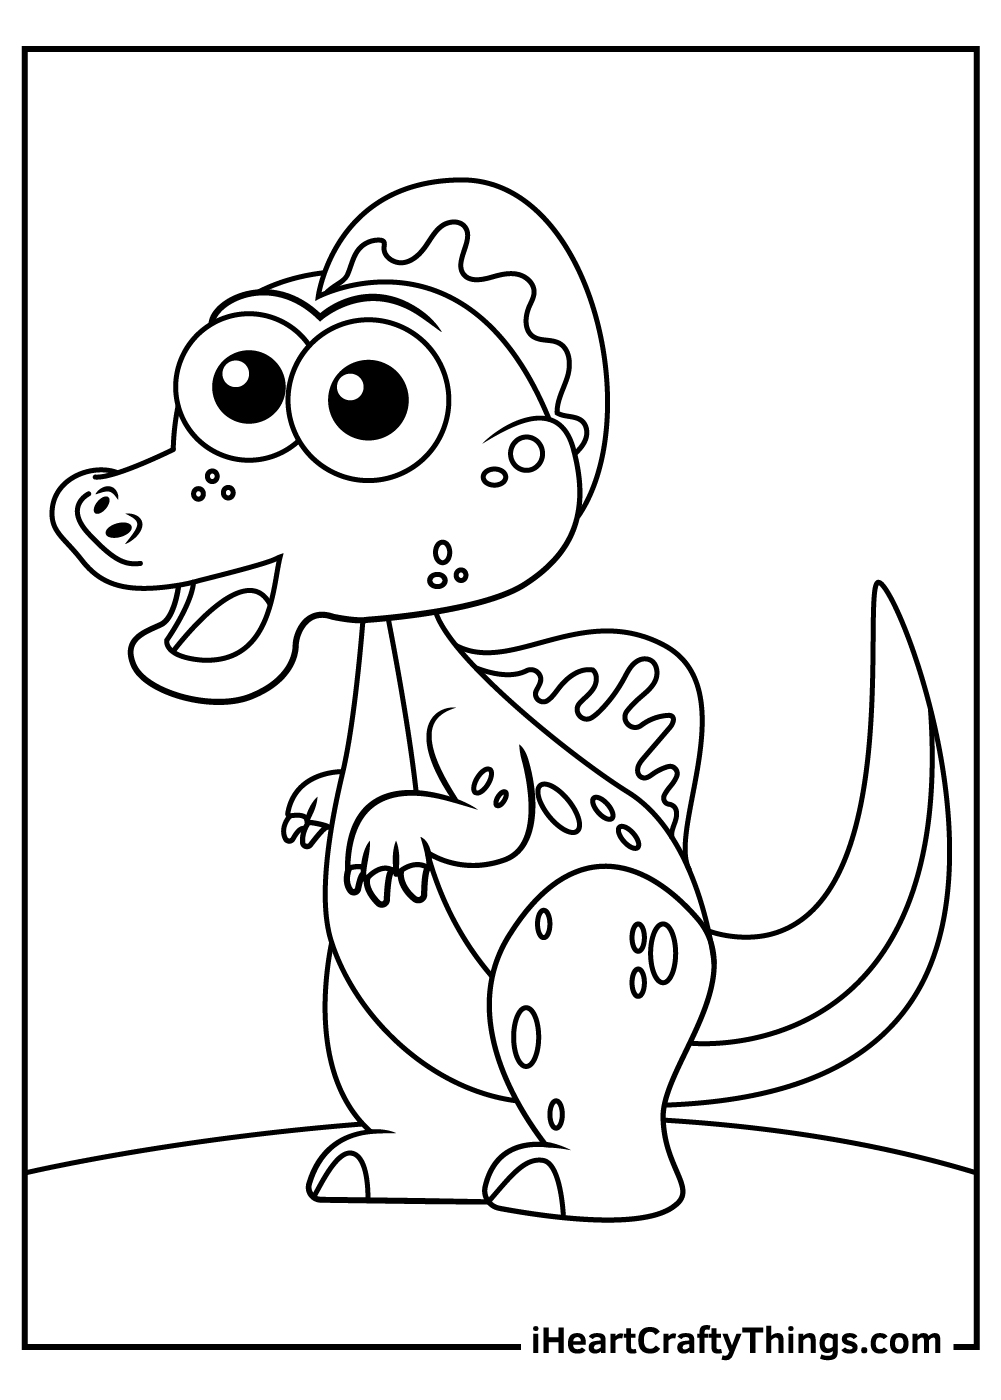 easy dinosaur spinosaurus coloring pages black and white